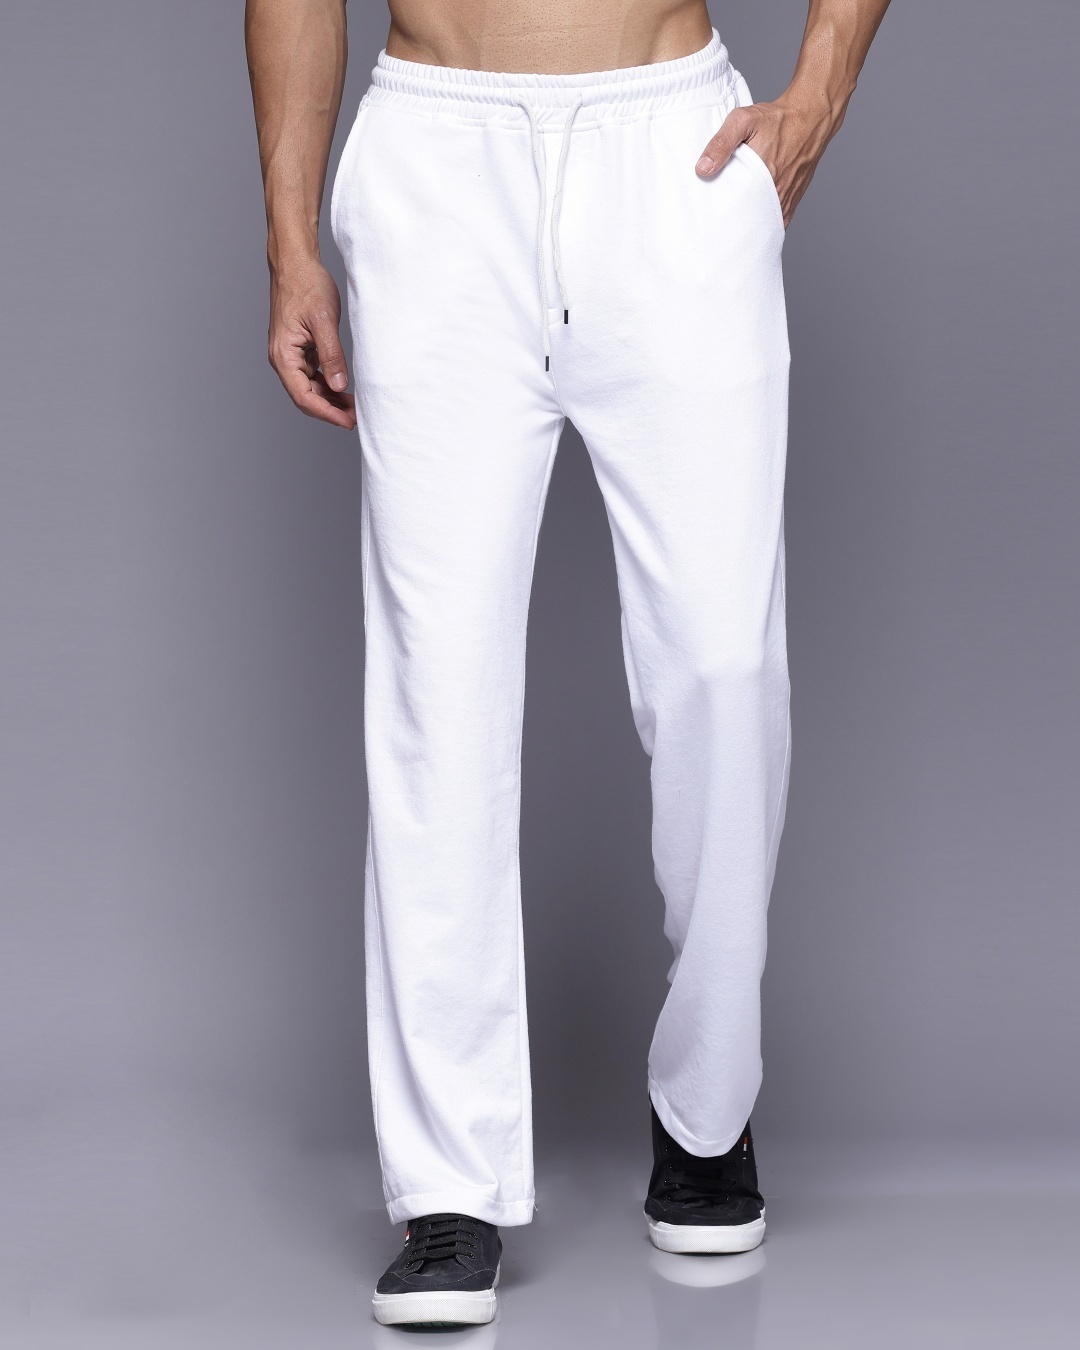 Buy Men's White Relaxed Fit Track Pants Online at Bewakoof